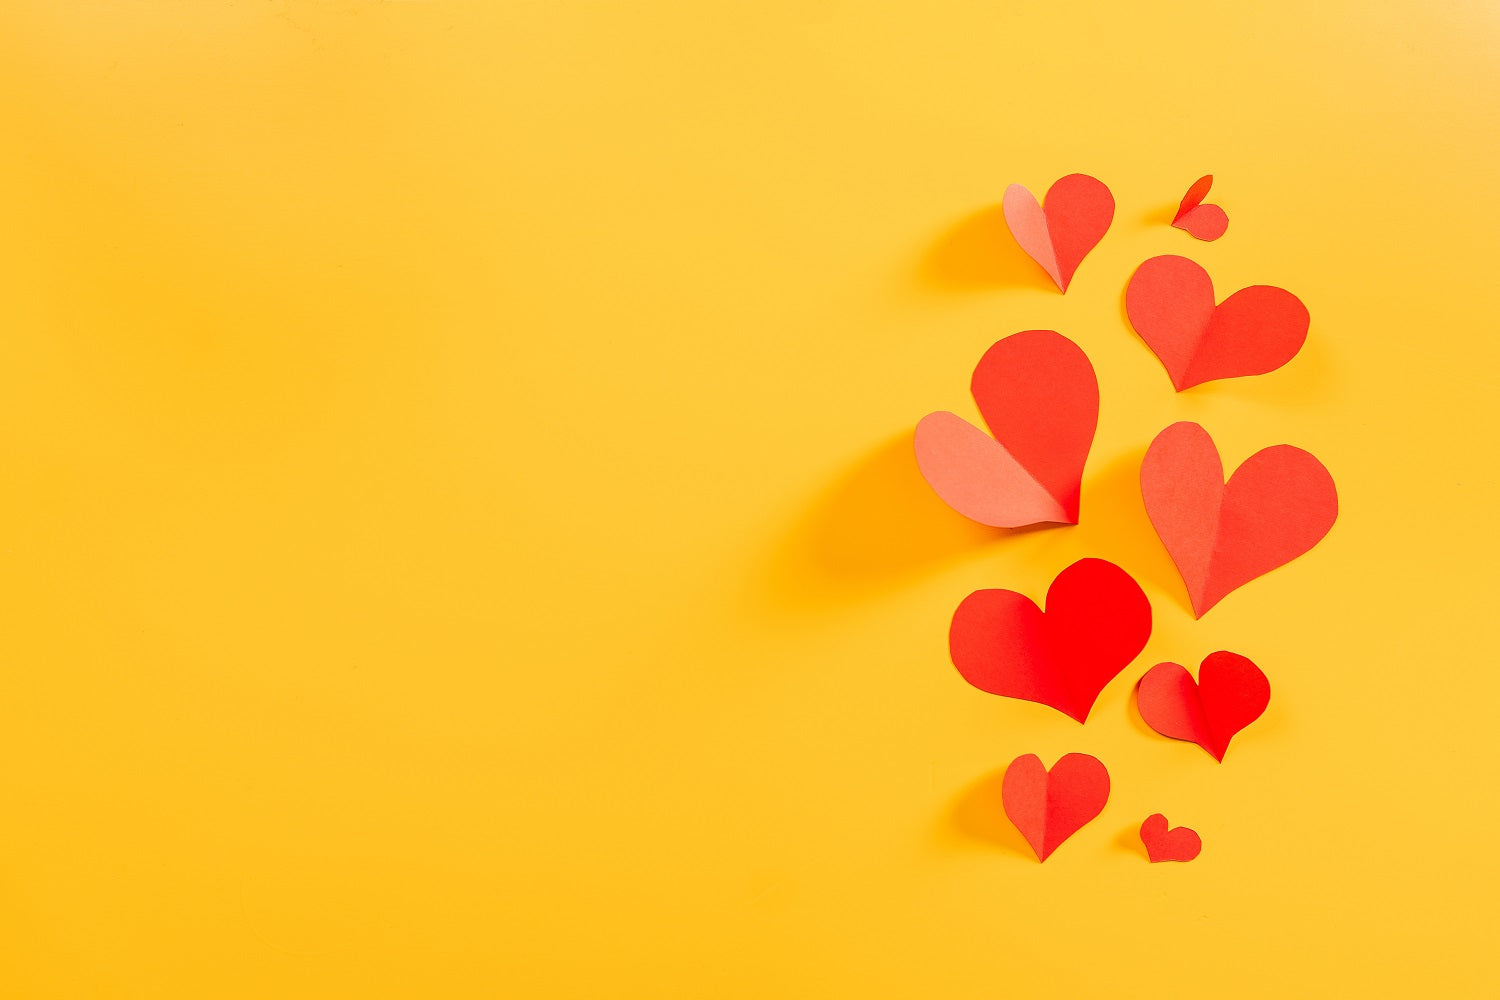 Red Hearts Against Yellow Background For Valentine's Day IBD-24377